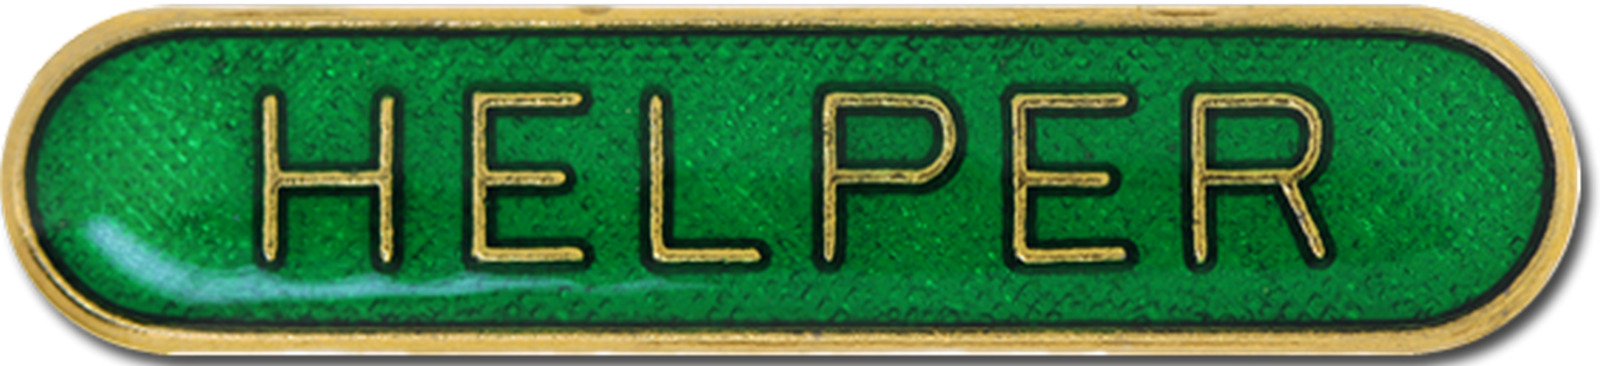 Helper Pin Badge in Green Enamel With Rounded Edge